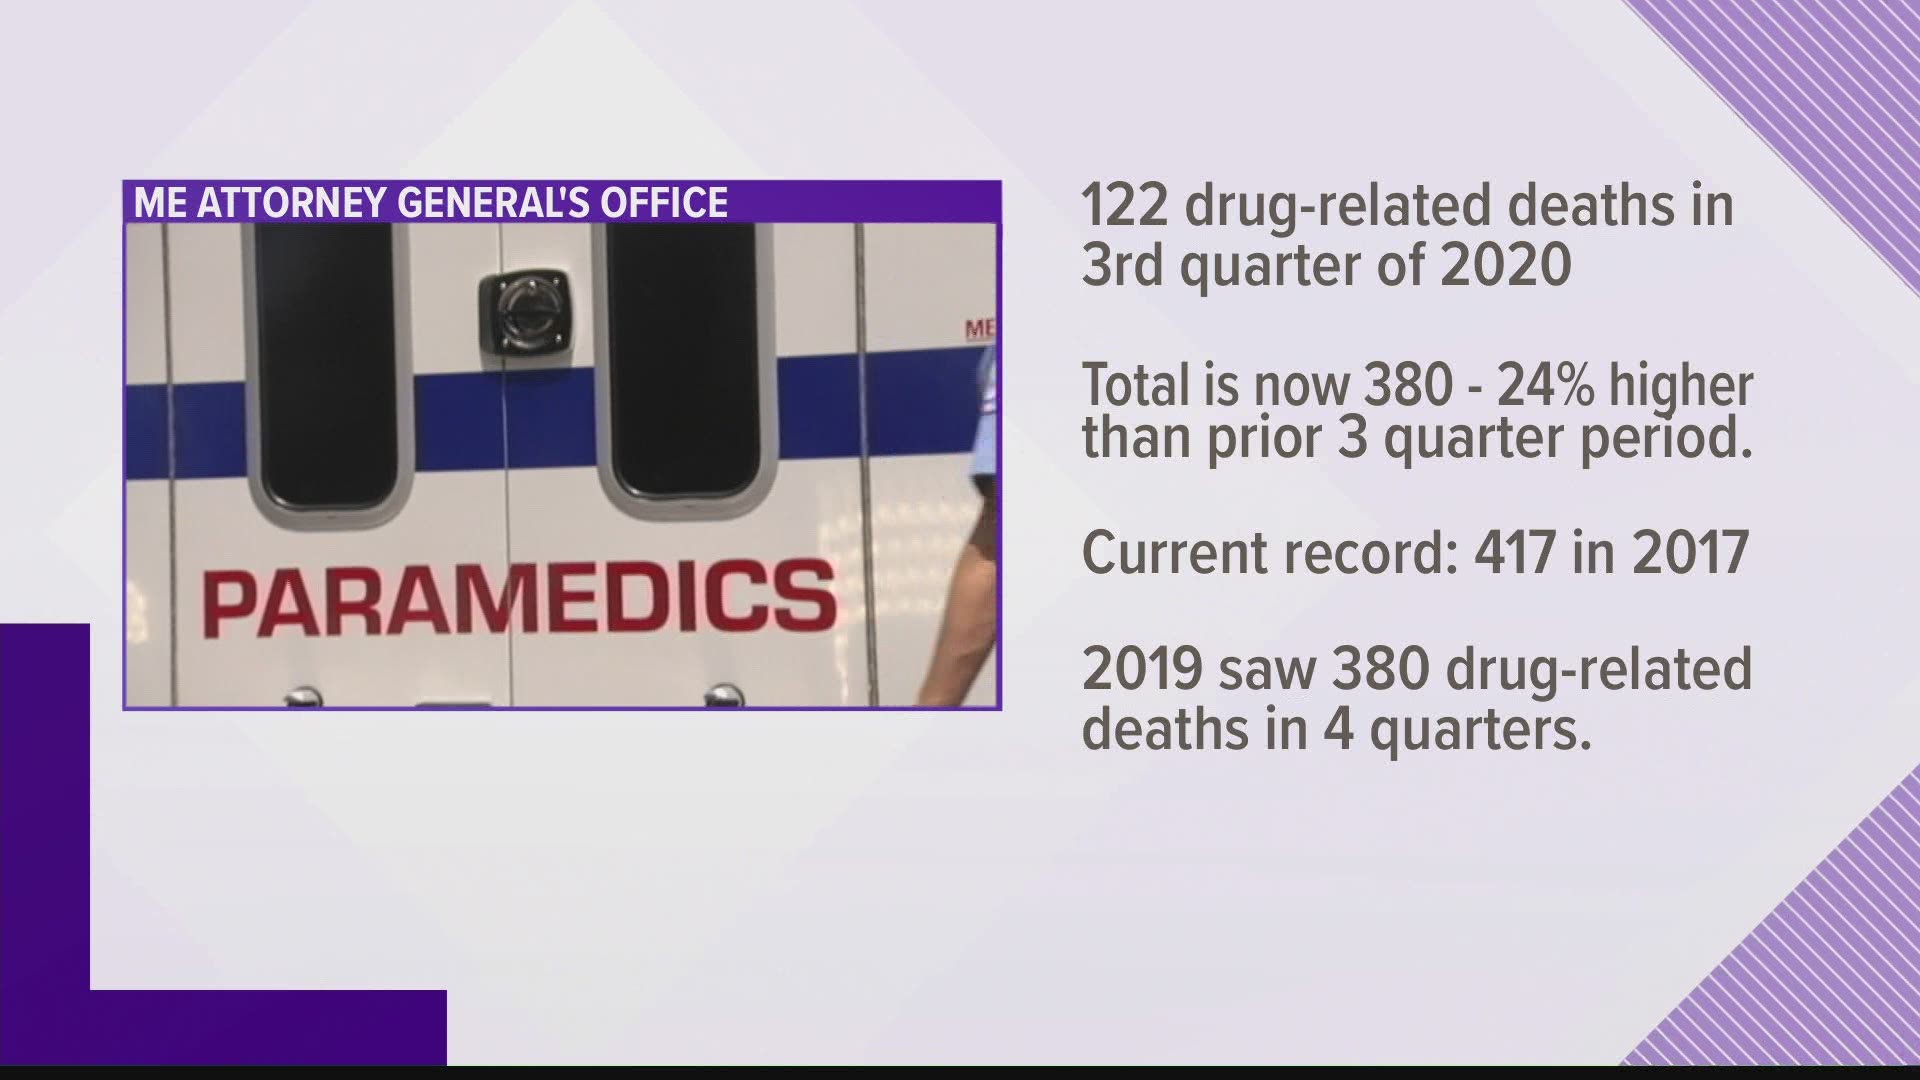 Maine is on pace to set a new state record for the number of drug overdose deaths in a year. Office of the Attorney general says 3rd quarter of 2020 saw 122 deaths